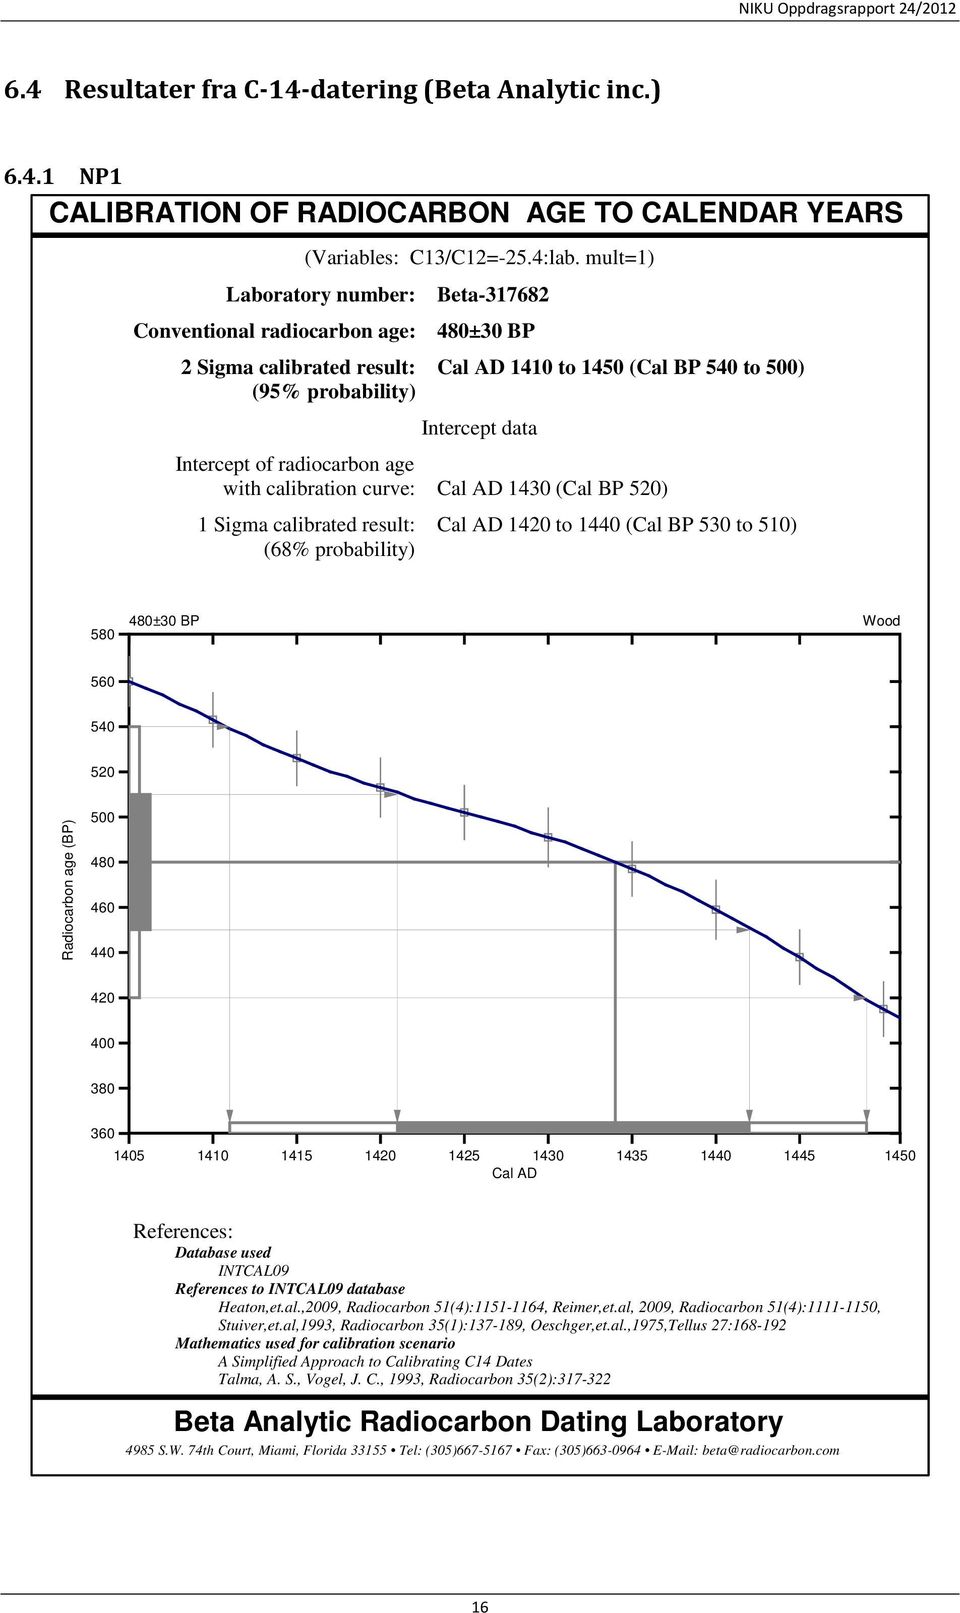 radiocarbon age with calibration curve: Cal AD 1430 (Cal BP 520) 1 Sigma calibrated result: Cal AD 1420 to 1440 (Cal BP 530 to 510) (68% probability) 580 480±30 BP Wood 560 540 520 Radiocarbon age